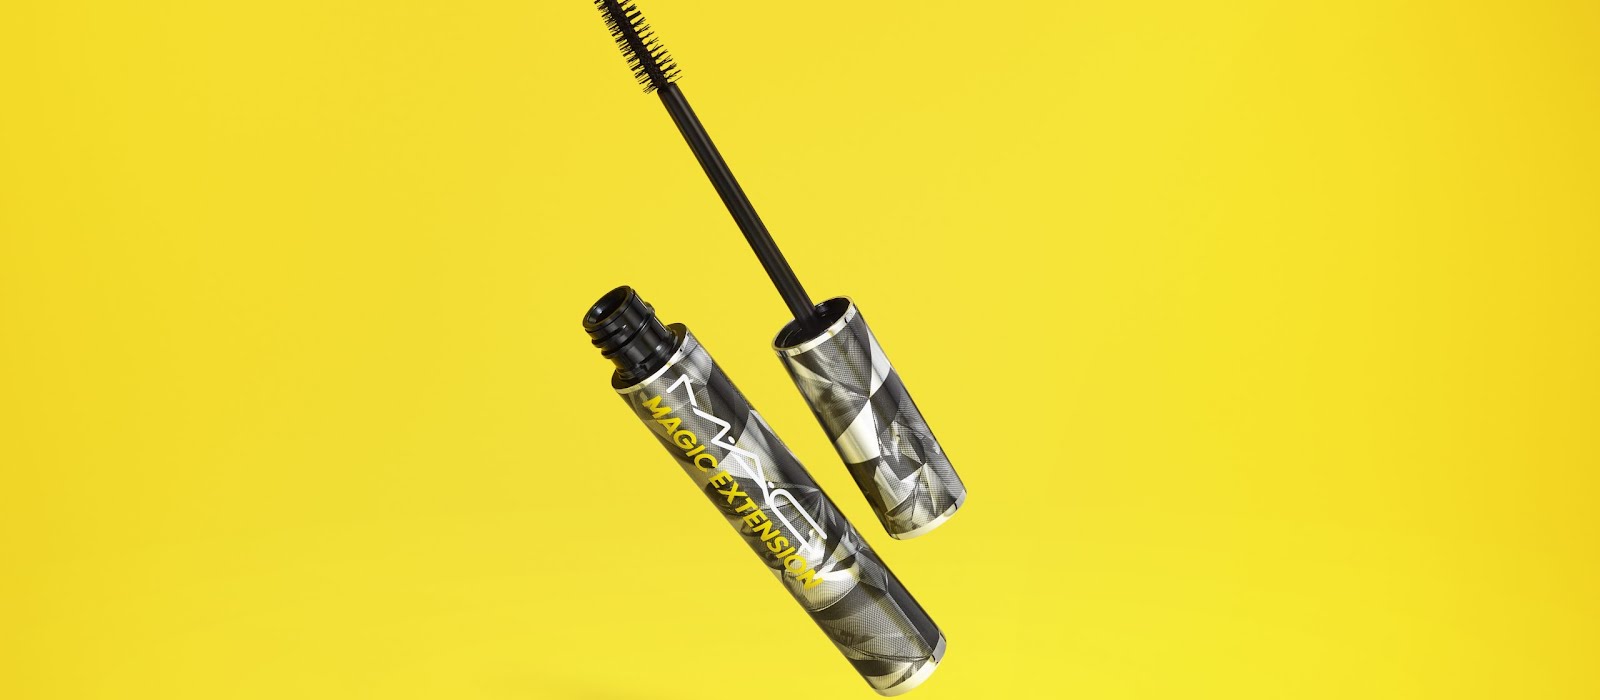 This lengthening mascara had a record breaking waiting list